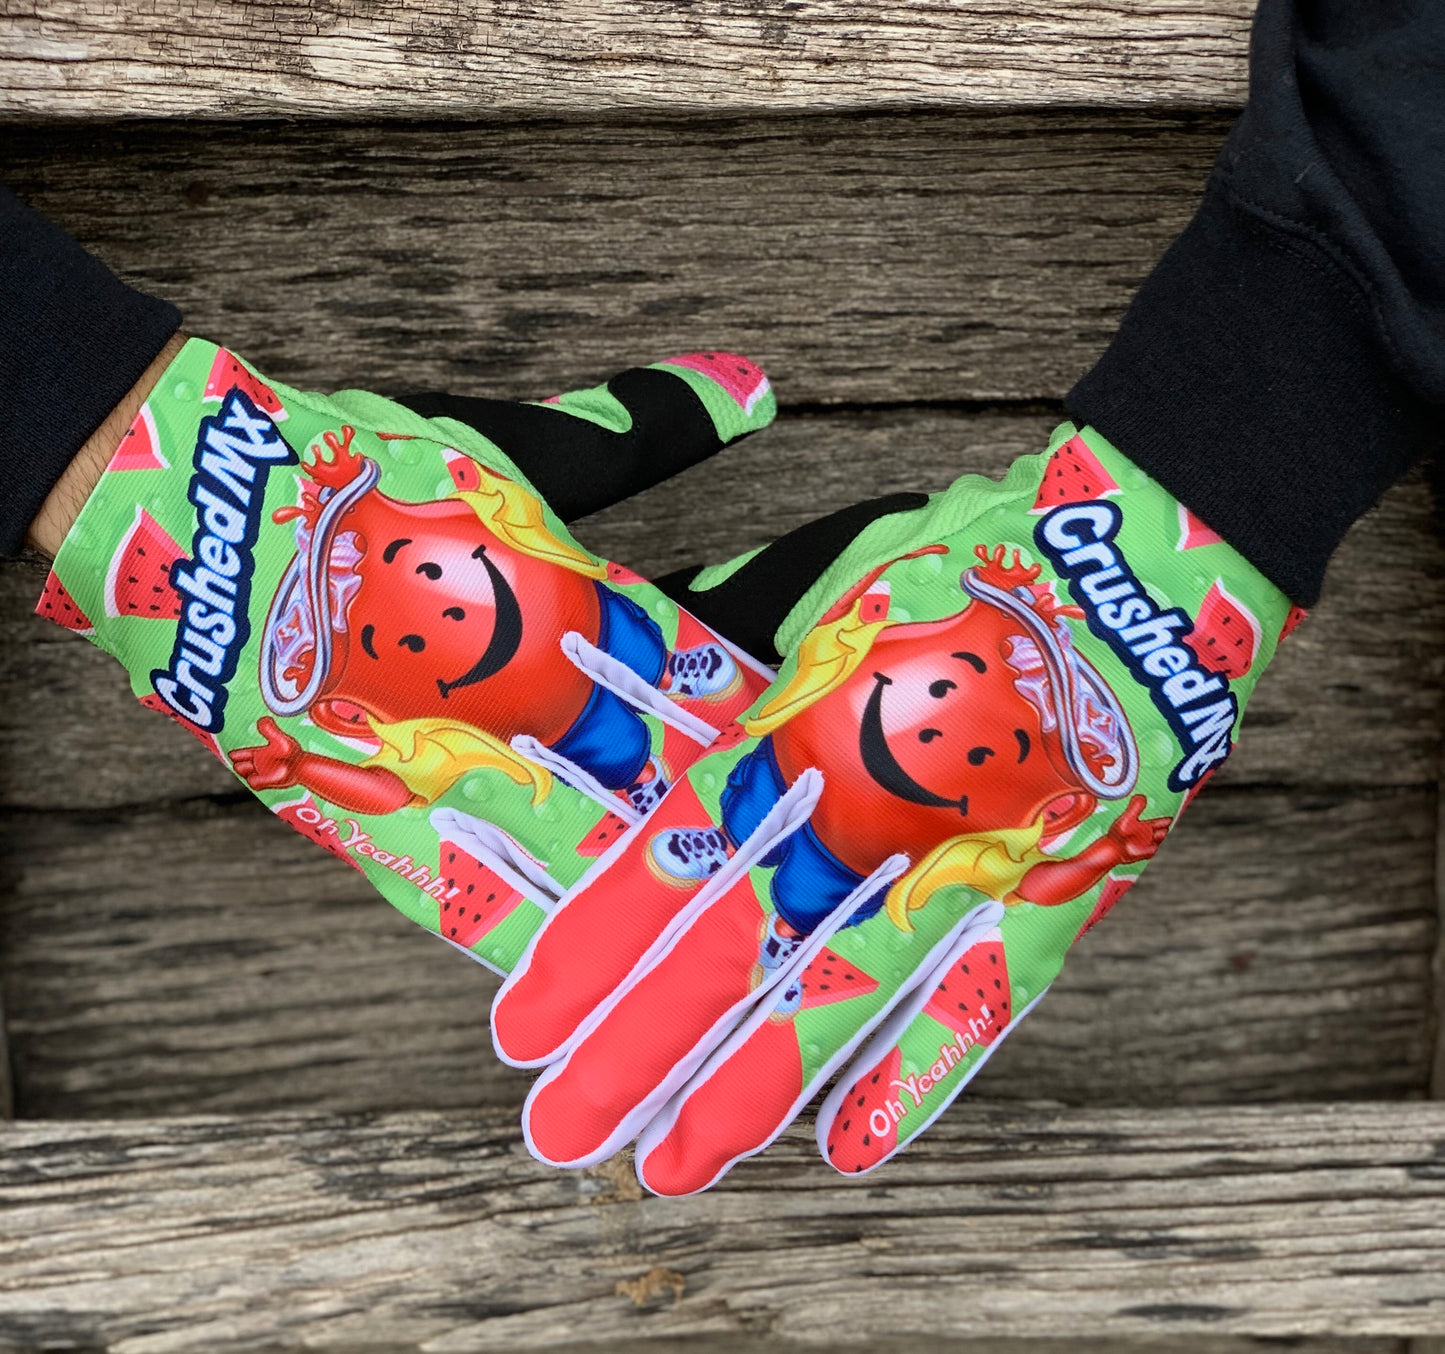 Watermelon “Cool” Aid Crushed Gloves